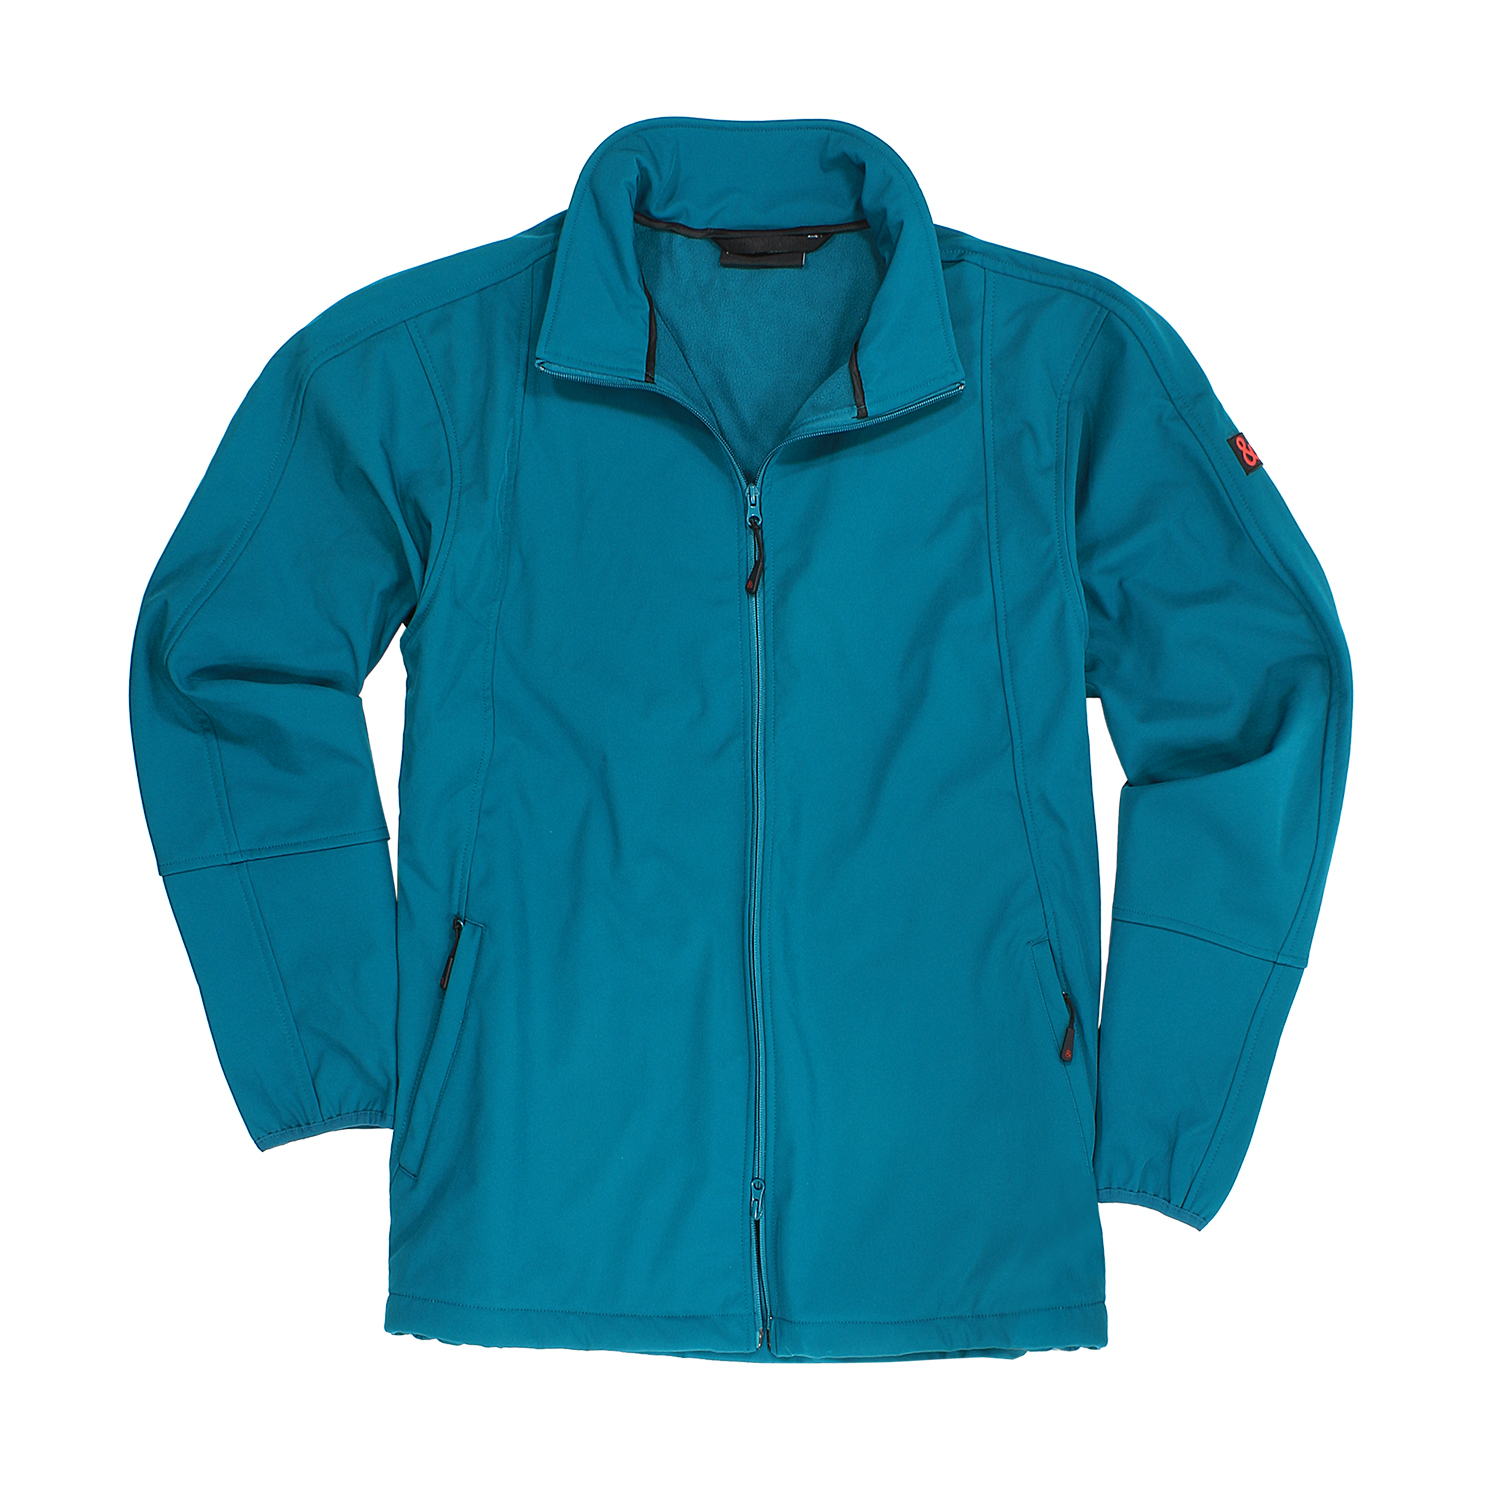 Softshell jacket in petrol by Marc&Mark in extra large sizes up to 10XL